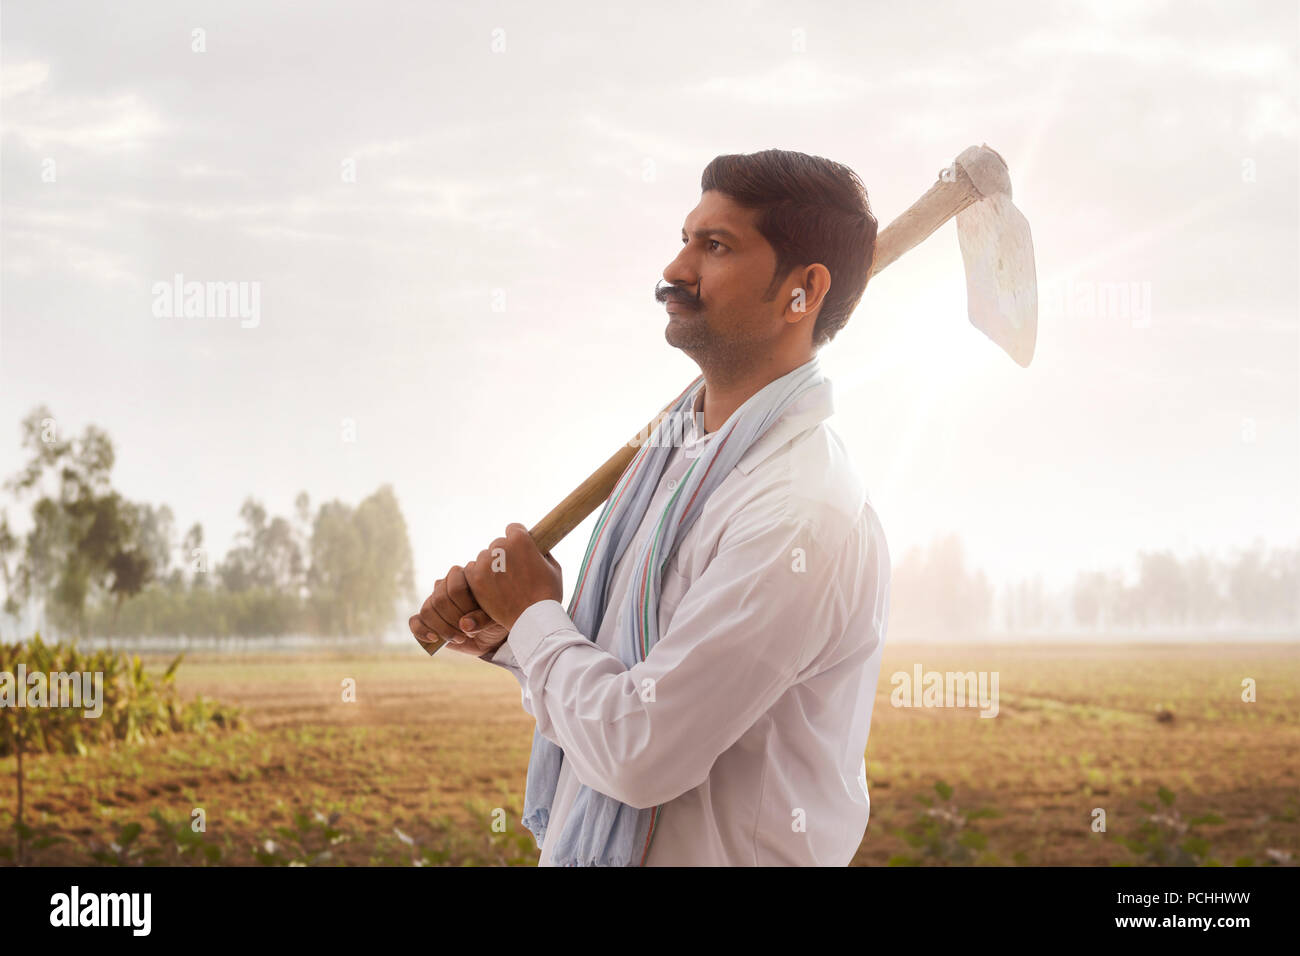 Indian farmer carrying hoe on his shoulder standing in field Stock Photo